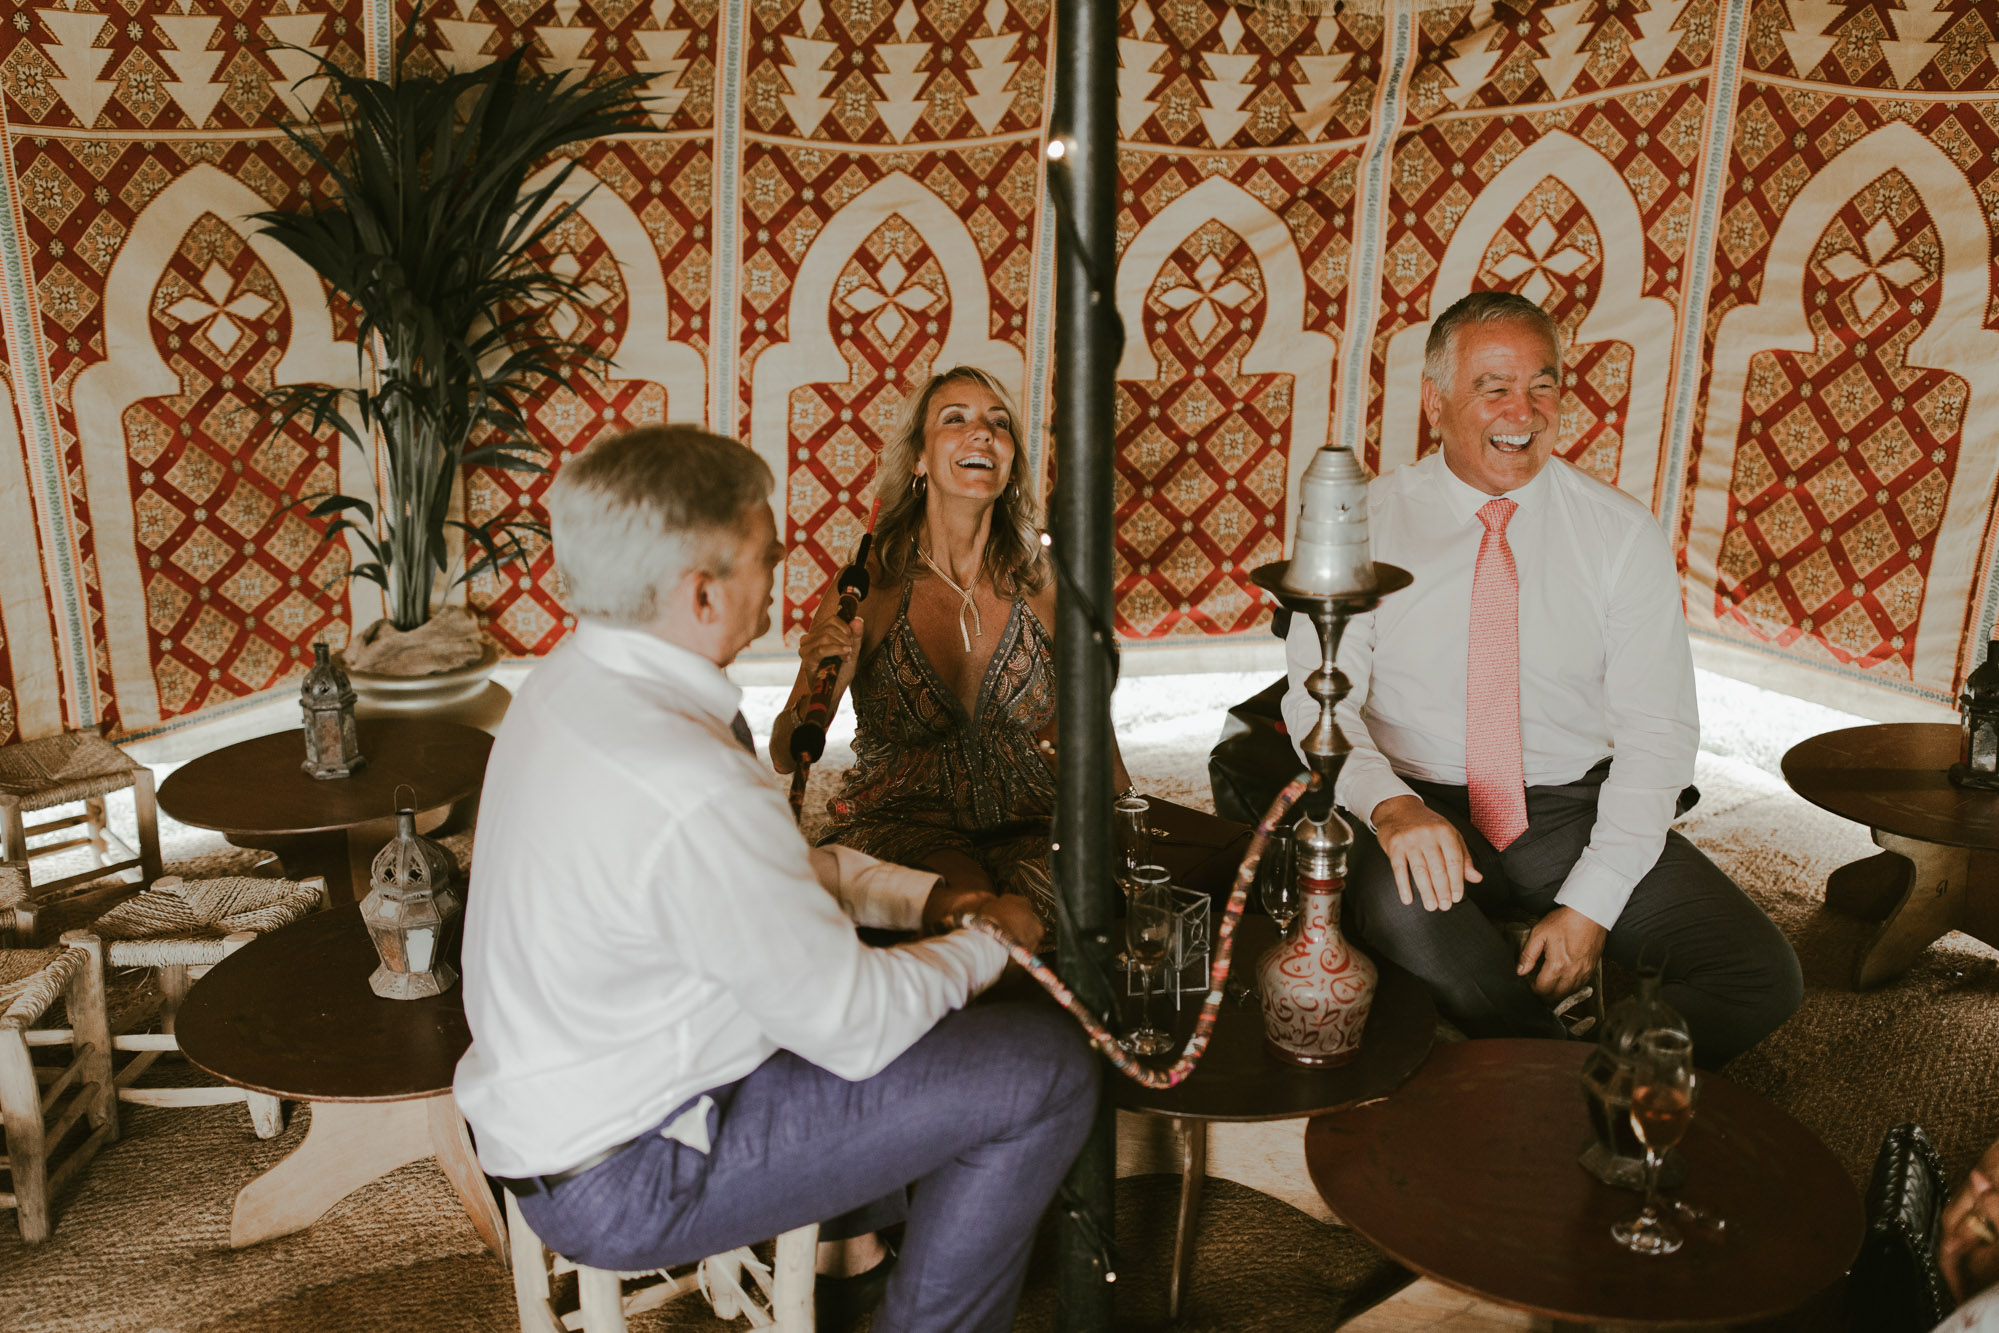 The Fantastical Tent Co - Hire Moroccan Marquee + Shisha Lounge